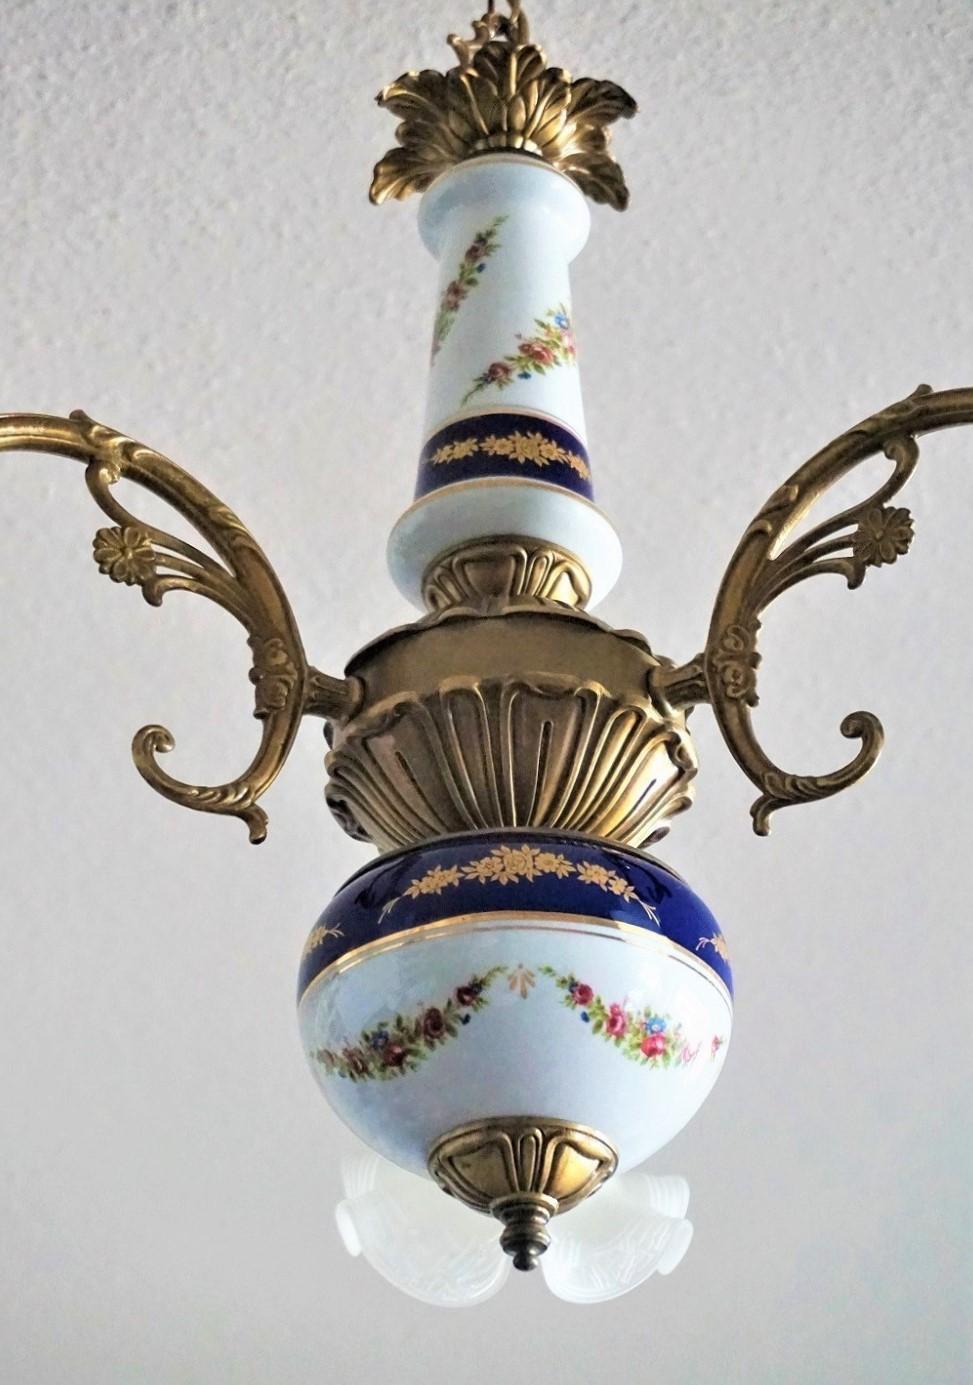 20th Century Midcentury French Limoges Porcelain and Murano Glass Three-Light Chandelier For Sale